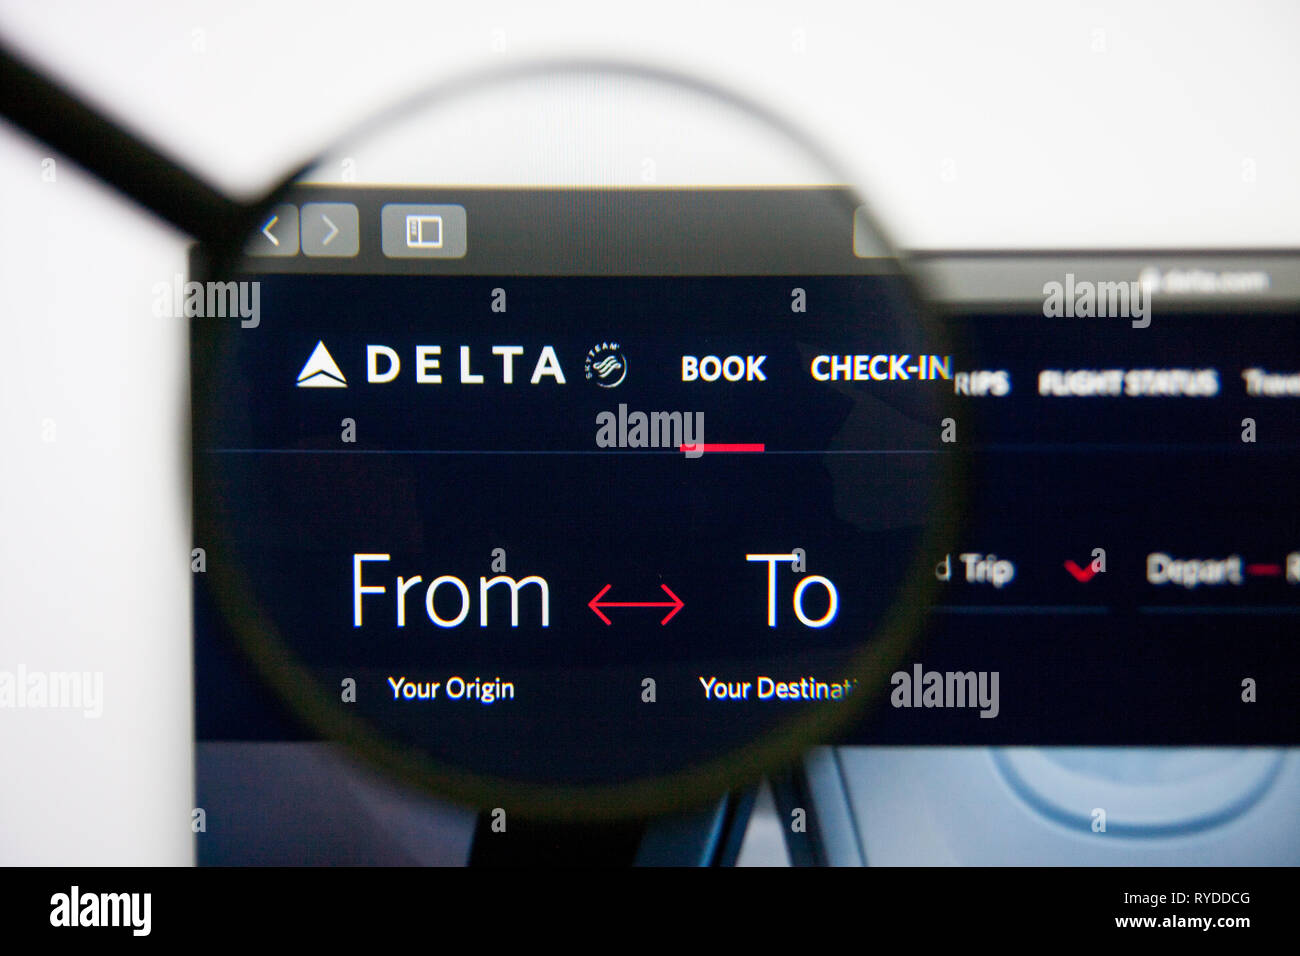 Los Angeles, California, USA - 14 February 2019: Delta Air Lines website homepage. Delta Air Lines logo visible on screen. Stock Photo